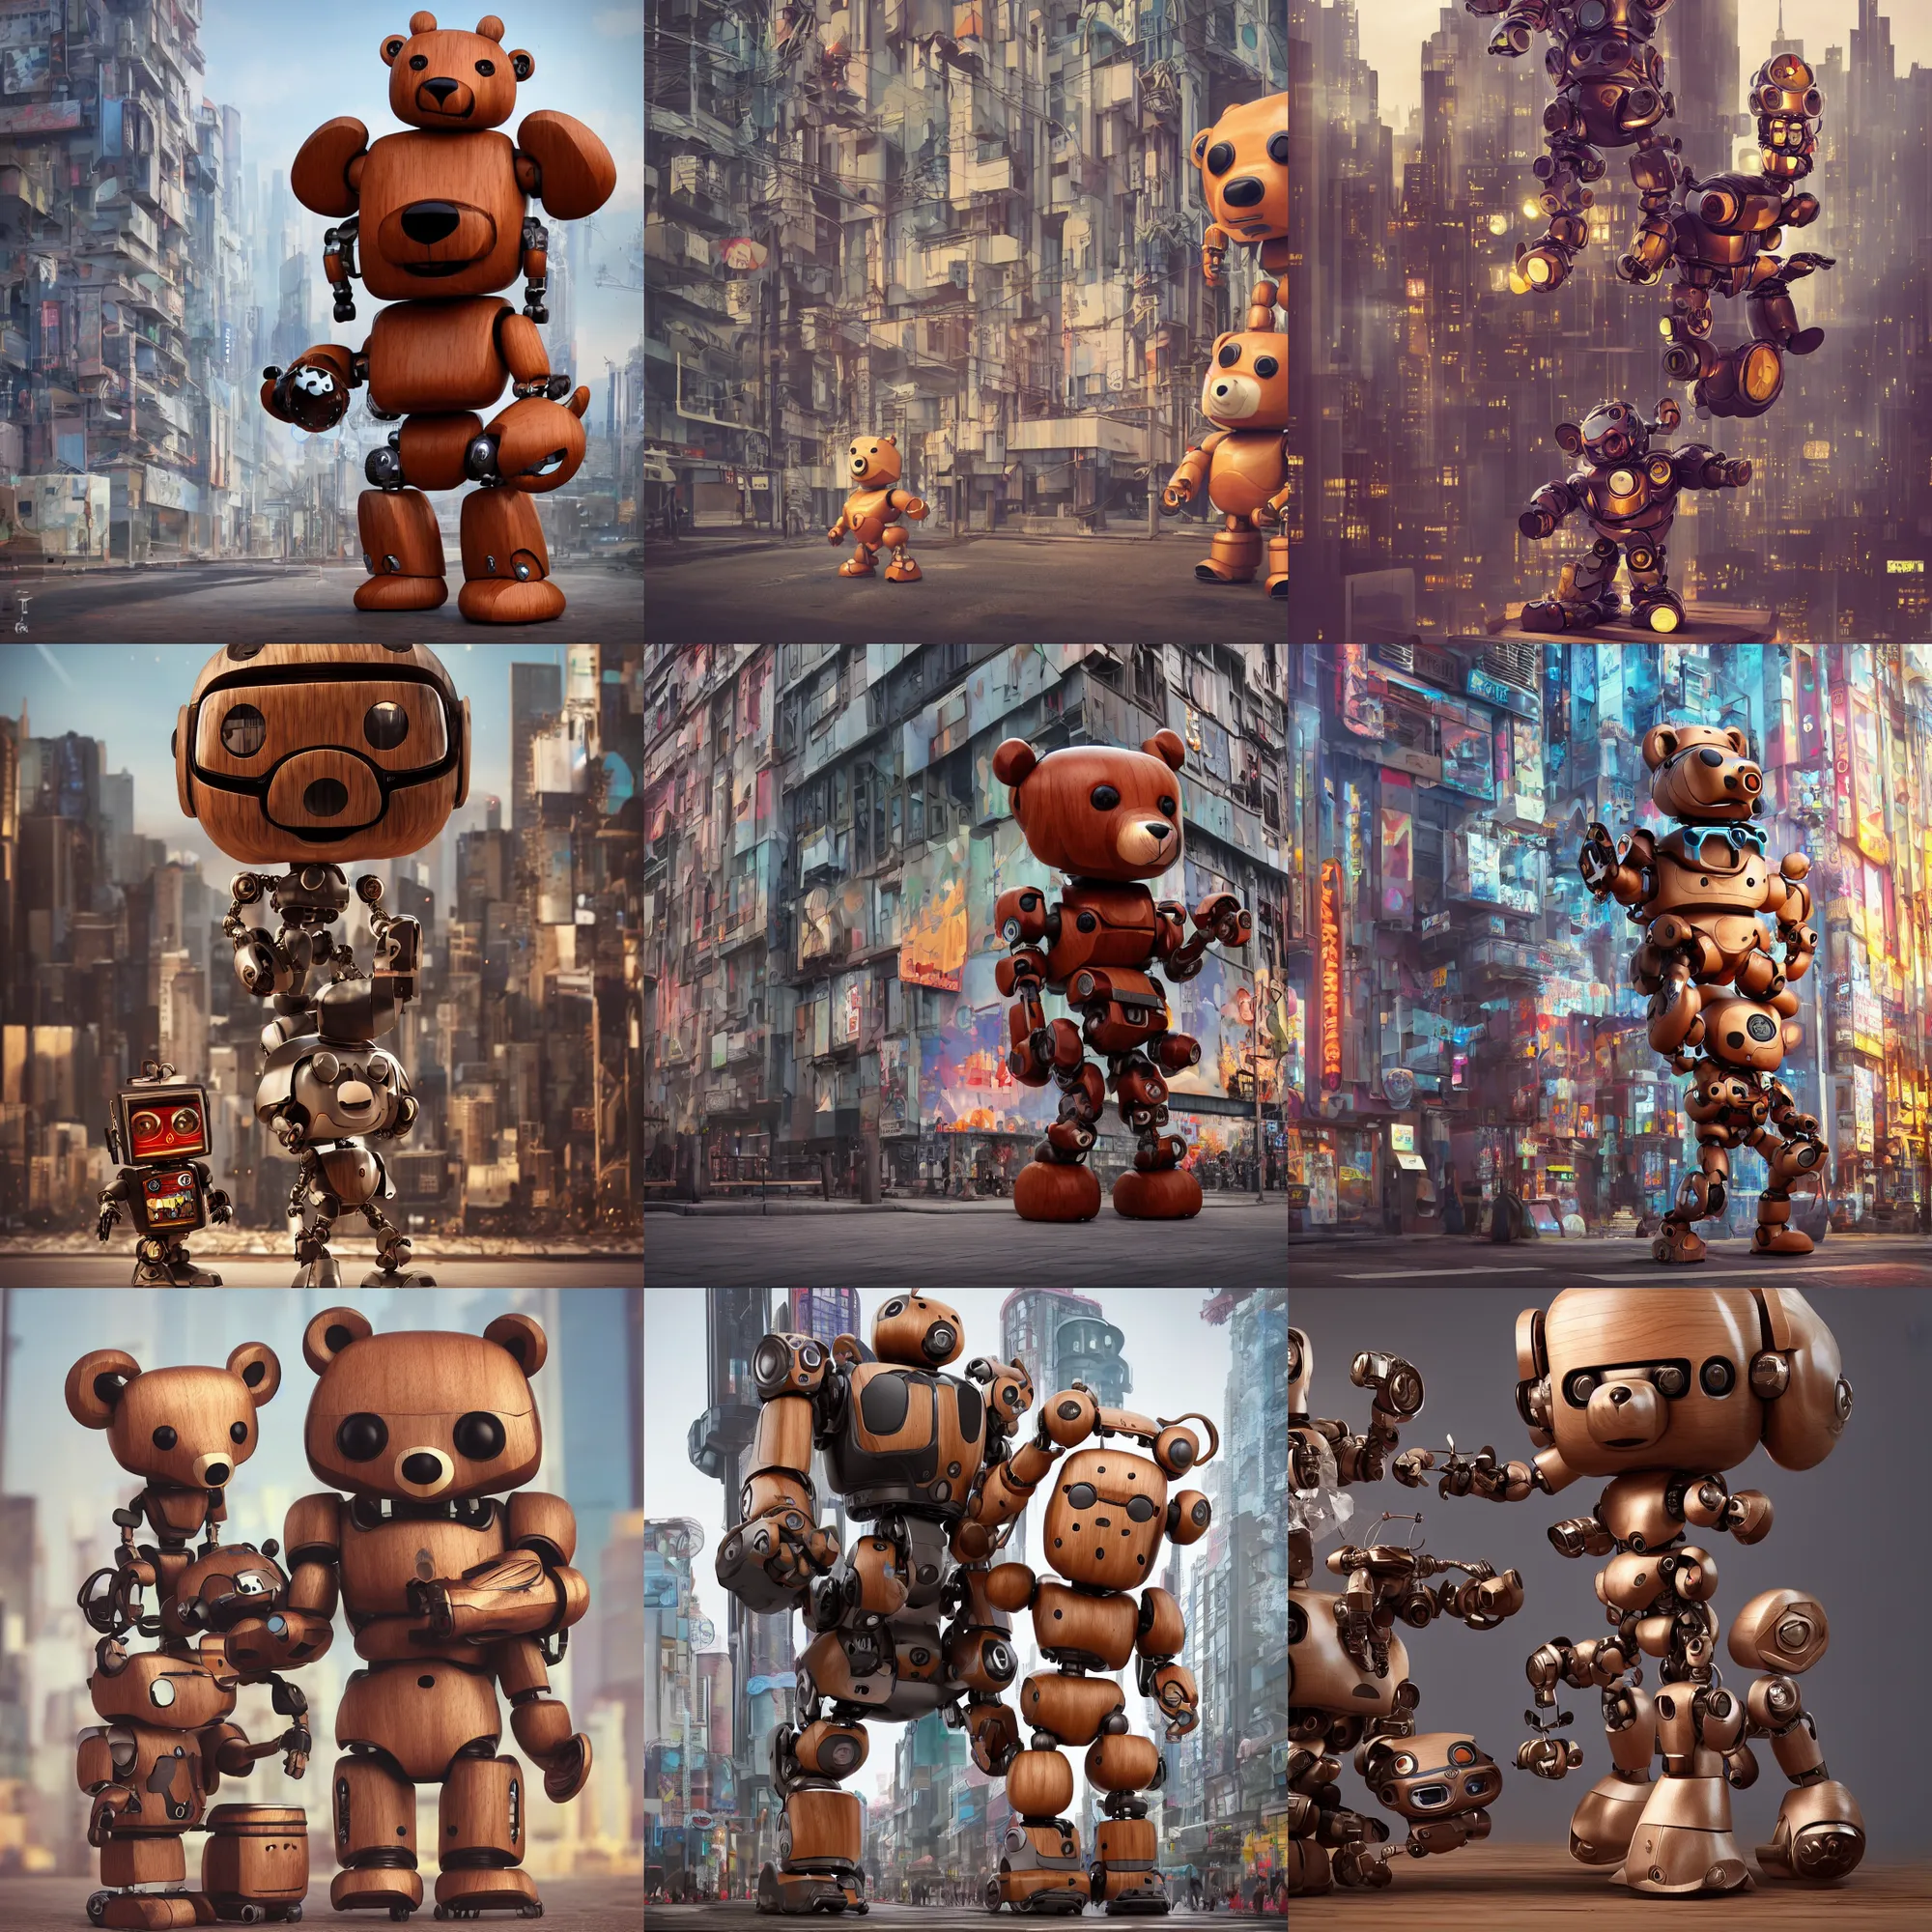 Prompt: 8 k octane render sculpture photorealistic beautiful character wooden design, art toys collectible figurine, mascot pop funko, very cute bear robot bear android cyberpunk, contemporary art gallery in background concept art cgsociety mucha